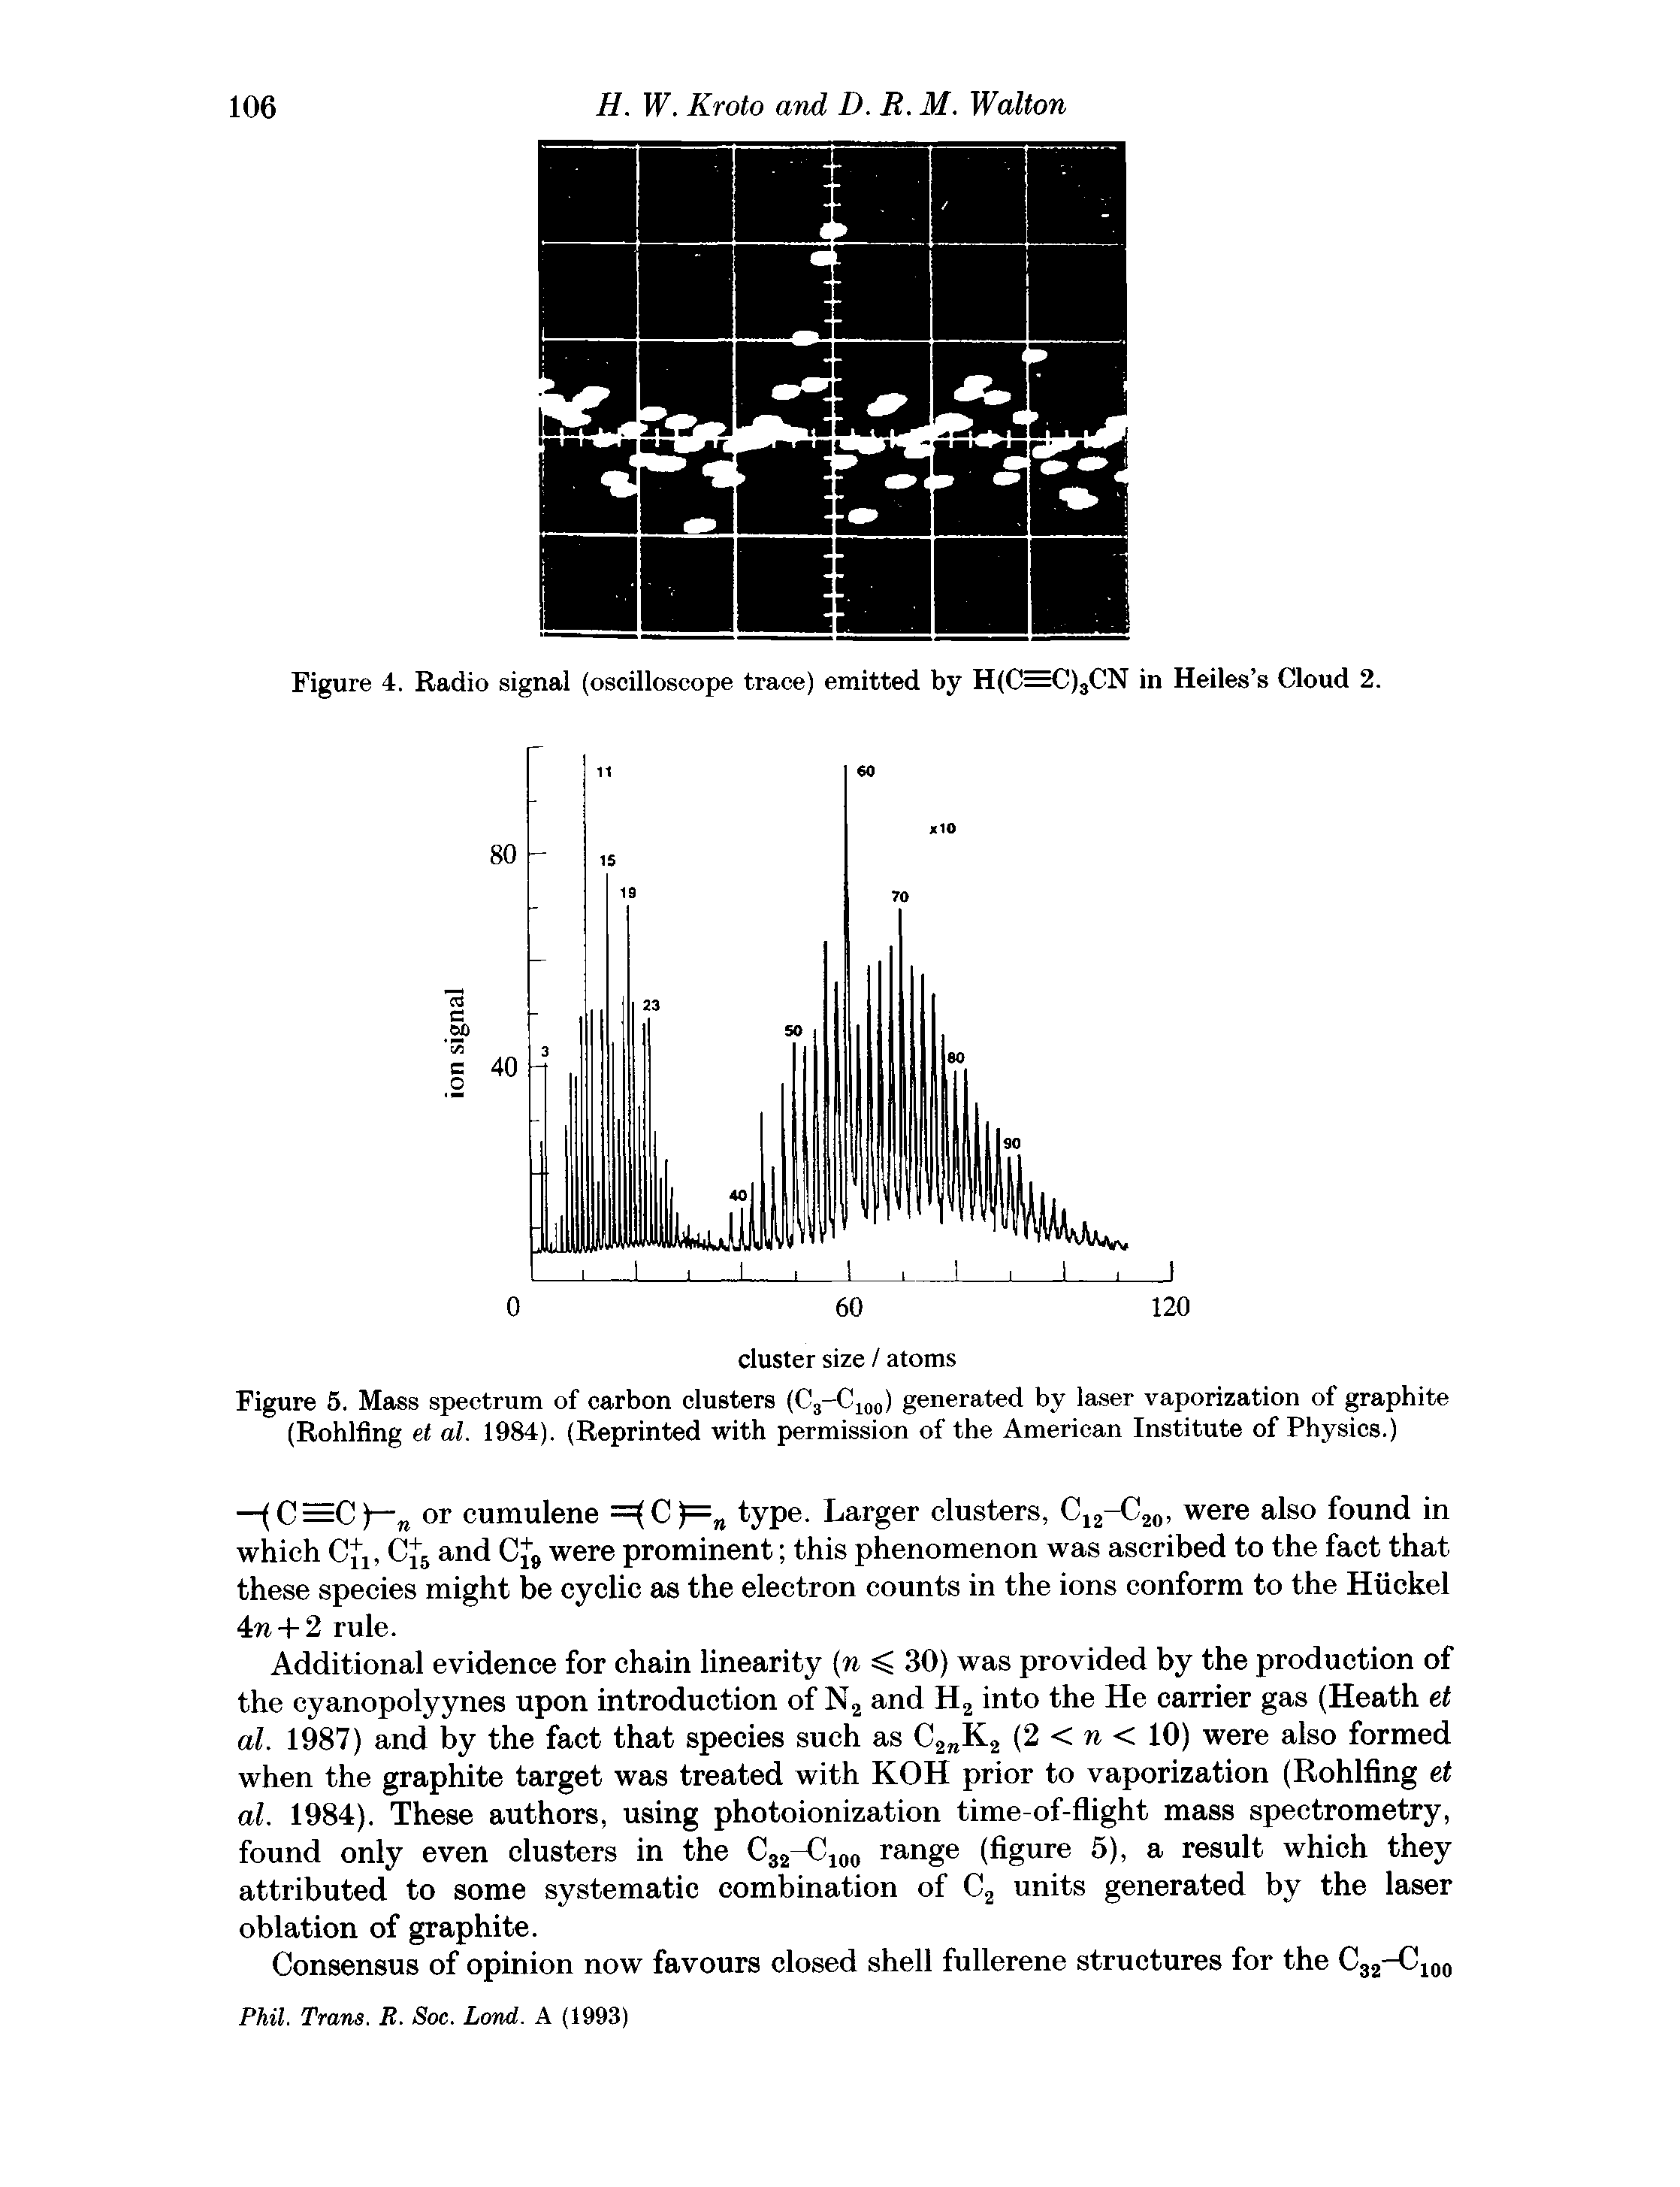 Figure 5. Mass spectrum of carbon clusters (C3-C100) generated by laser vaporization of graphite (Rohlfing el al. 1984). (Reprinted with permission of the American Institute of Physics.)...